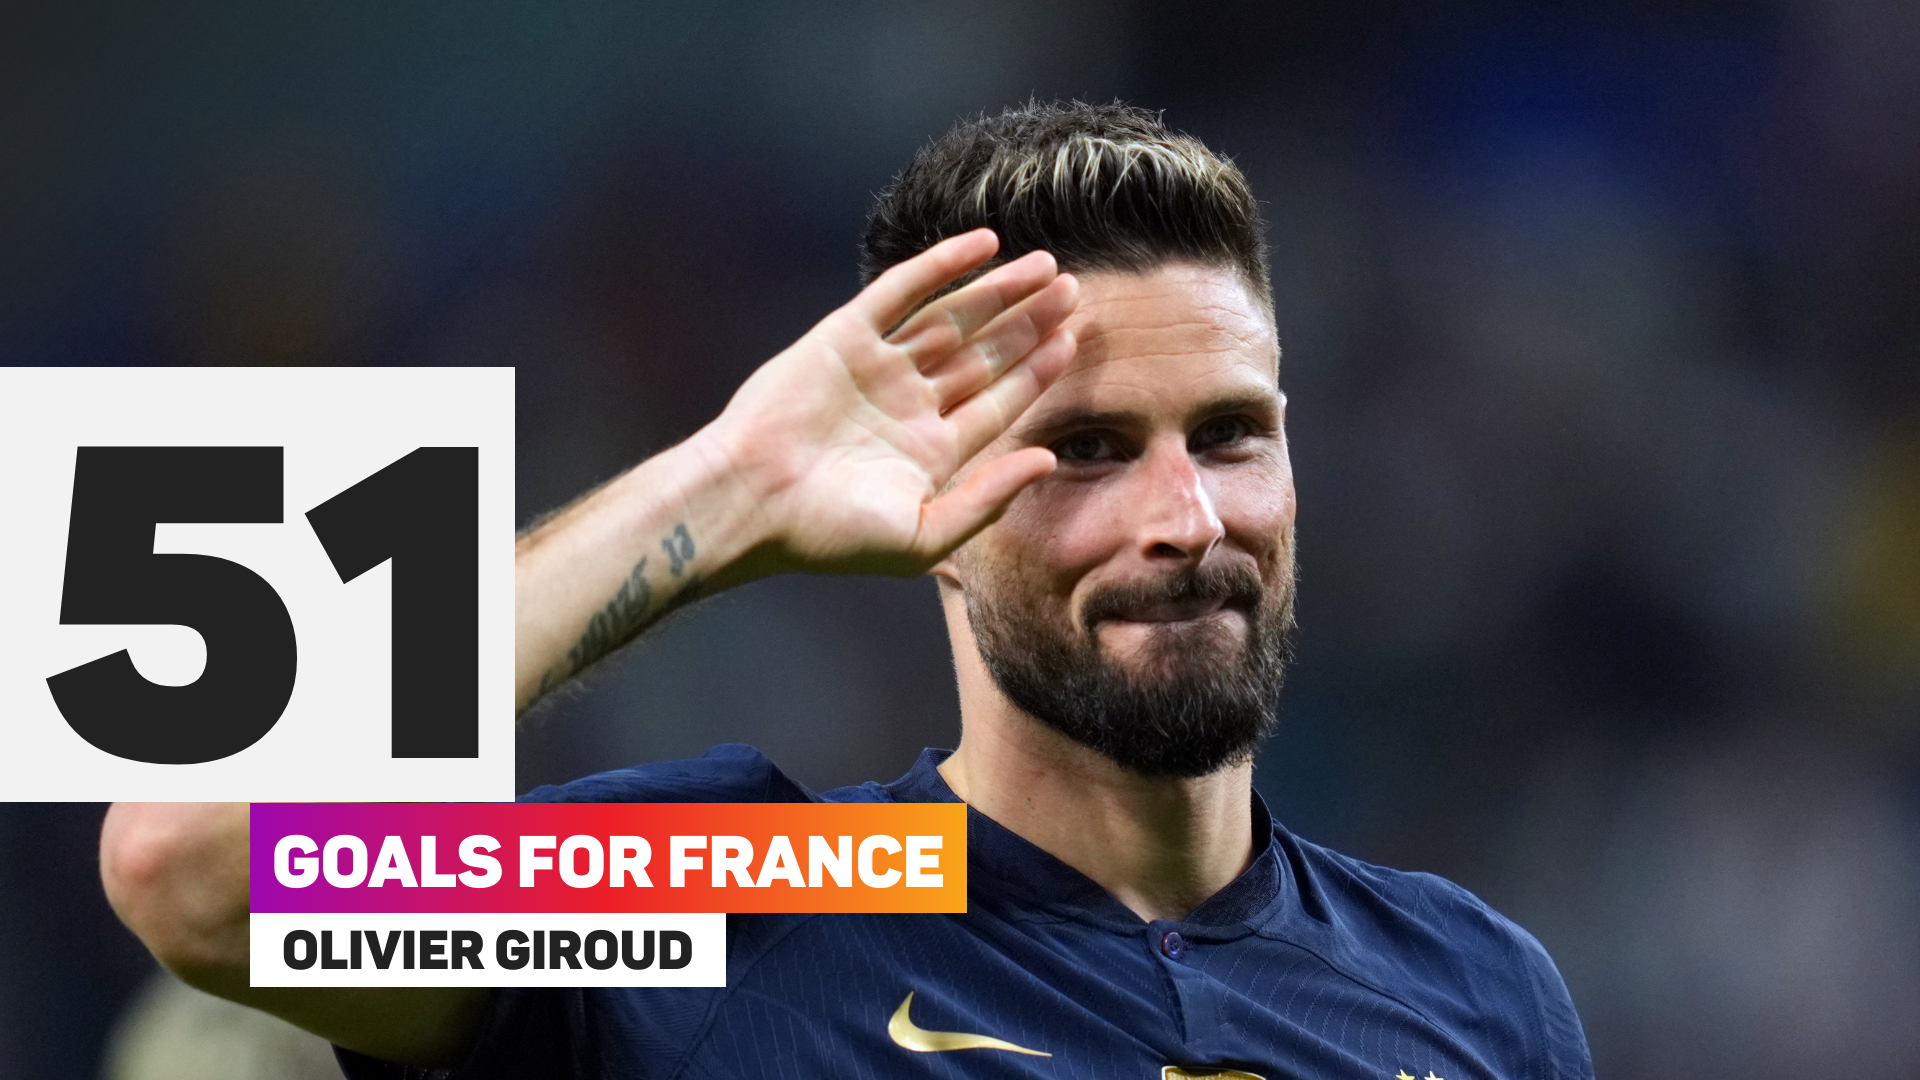 Olivier Giroud is hunting a record for France